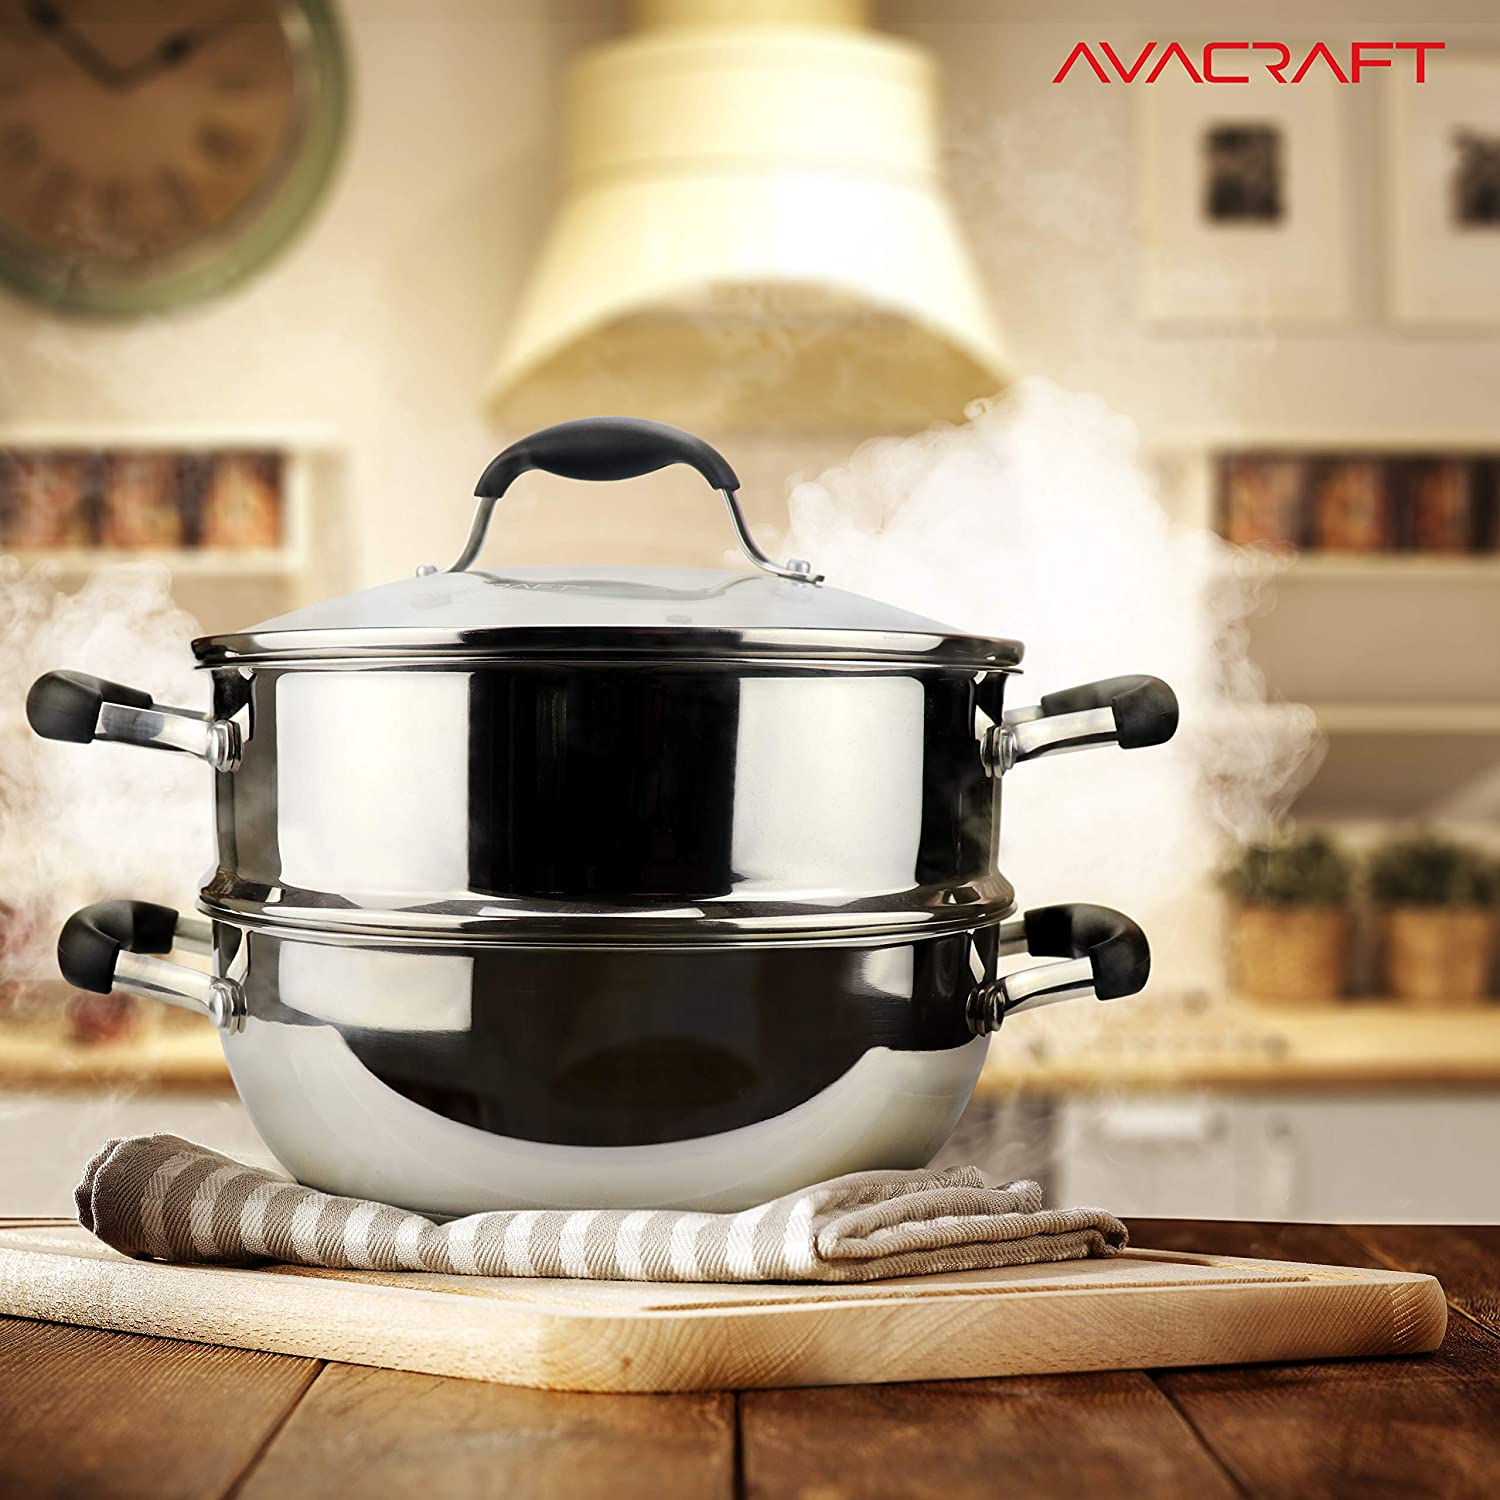 AVACRAFT 18/10 Stainless Steel Everyday Pan, Stir Fry Pan with